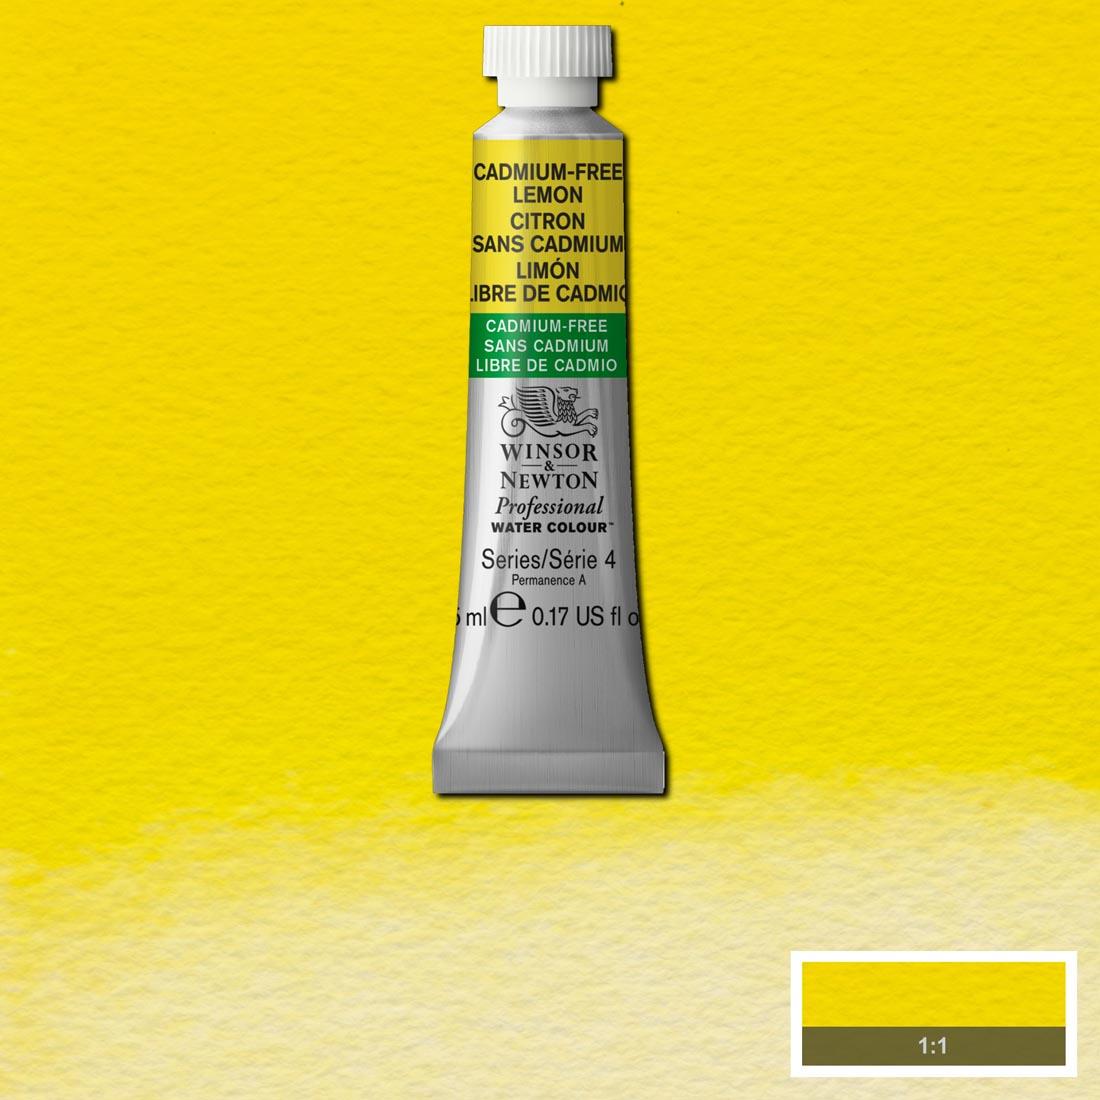 Tube of Cadmium-Free Lemon Winsor & Newton Professional Water Colour with a paint swatch for the background